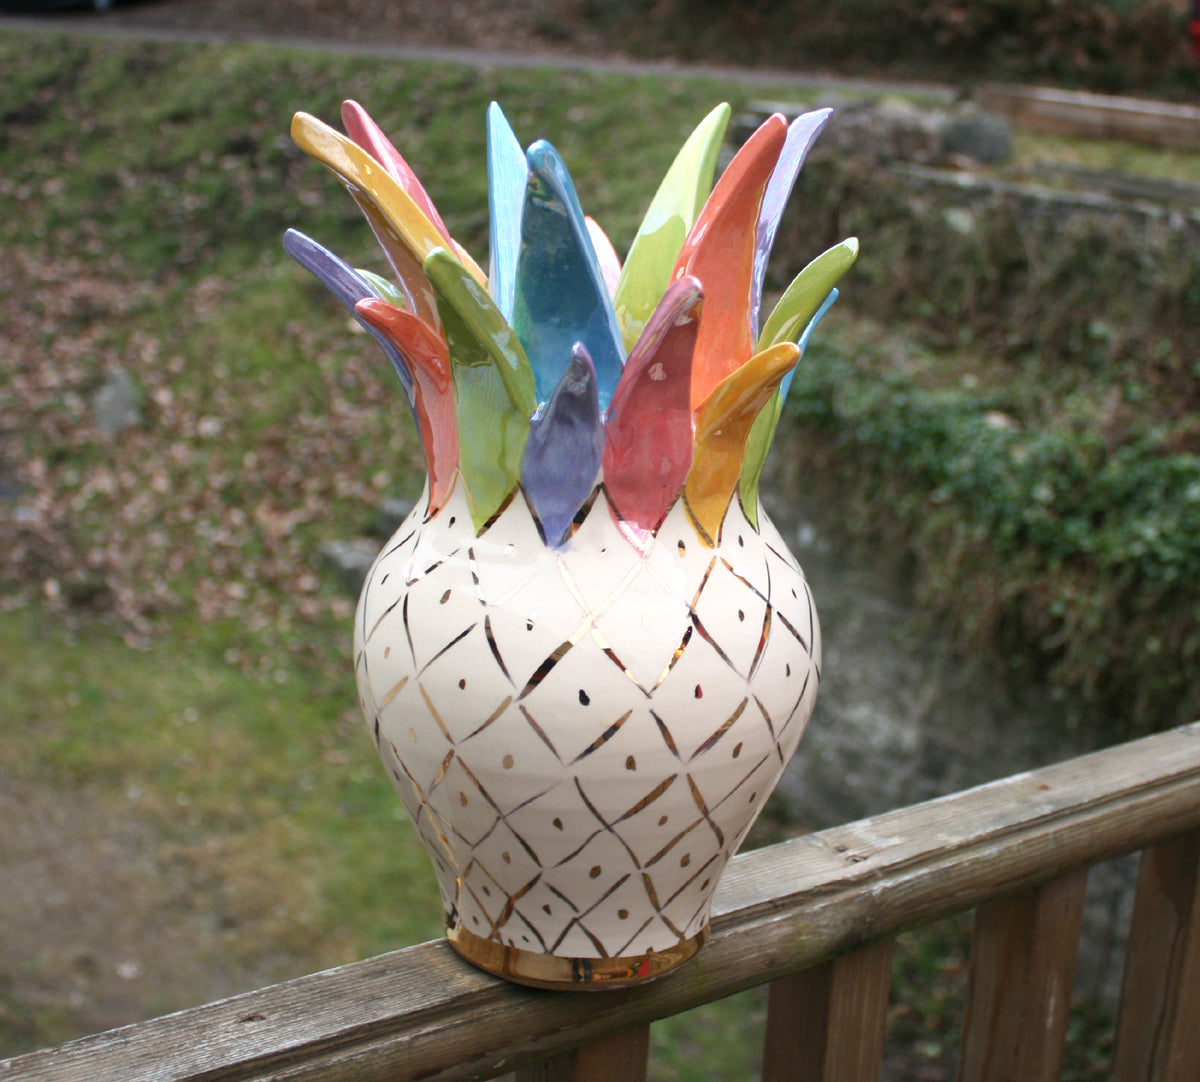 Large Pineapple Vase in White with Coloured